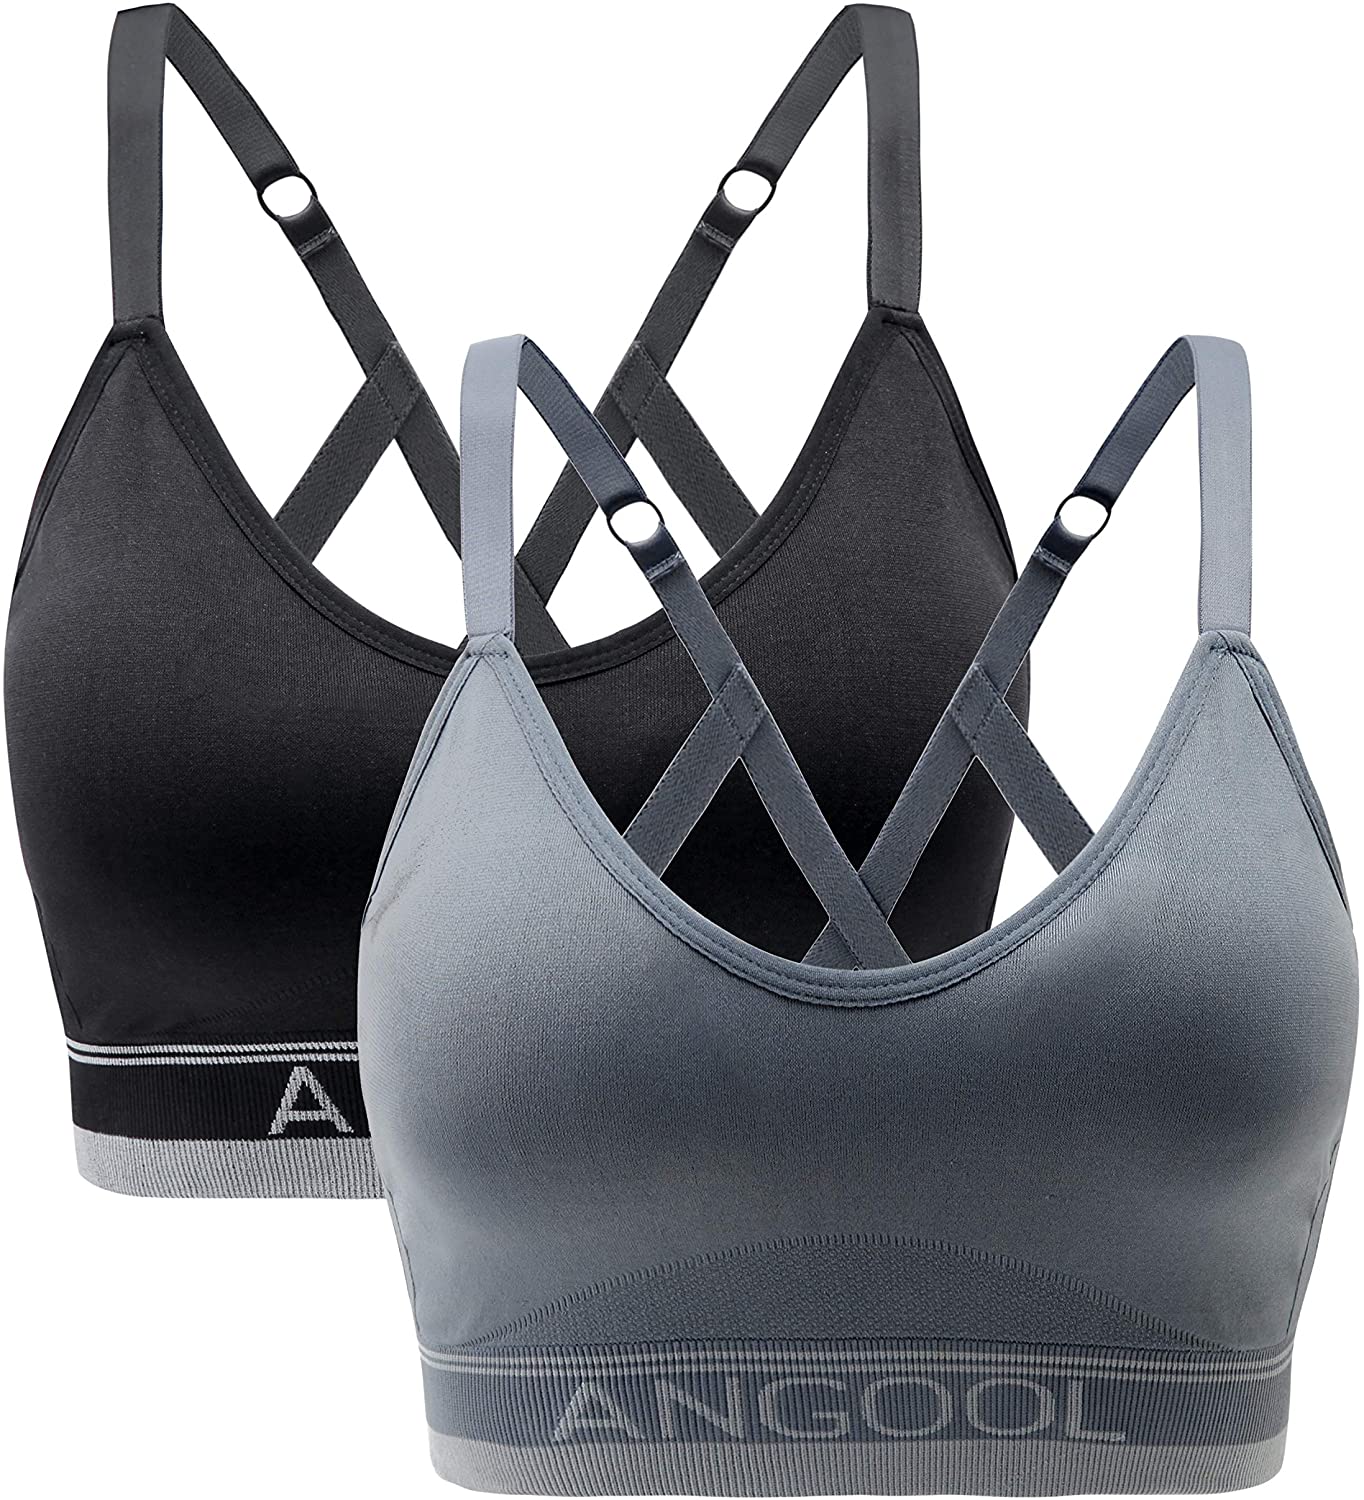 Buy ANGOOL Strappy Sports Bras for Women - Medium Support Wirefree Yoga Bra  Activewear 3 Pack at